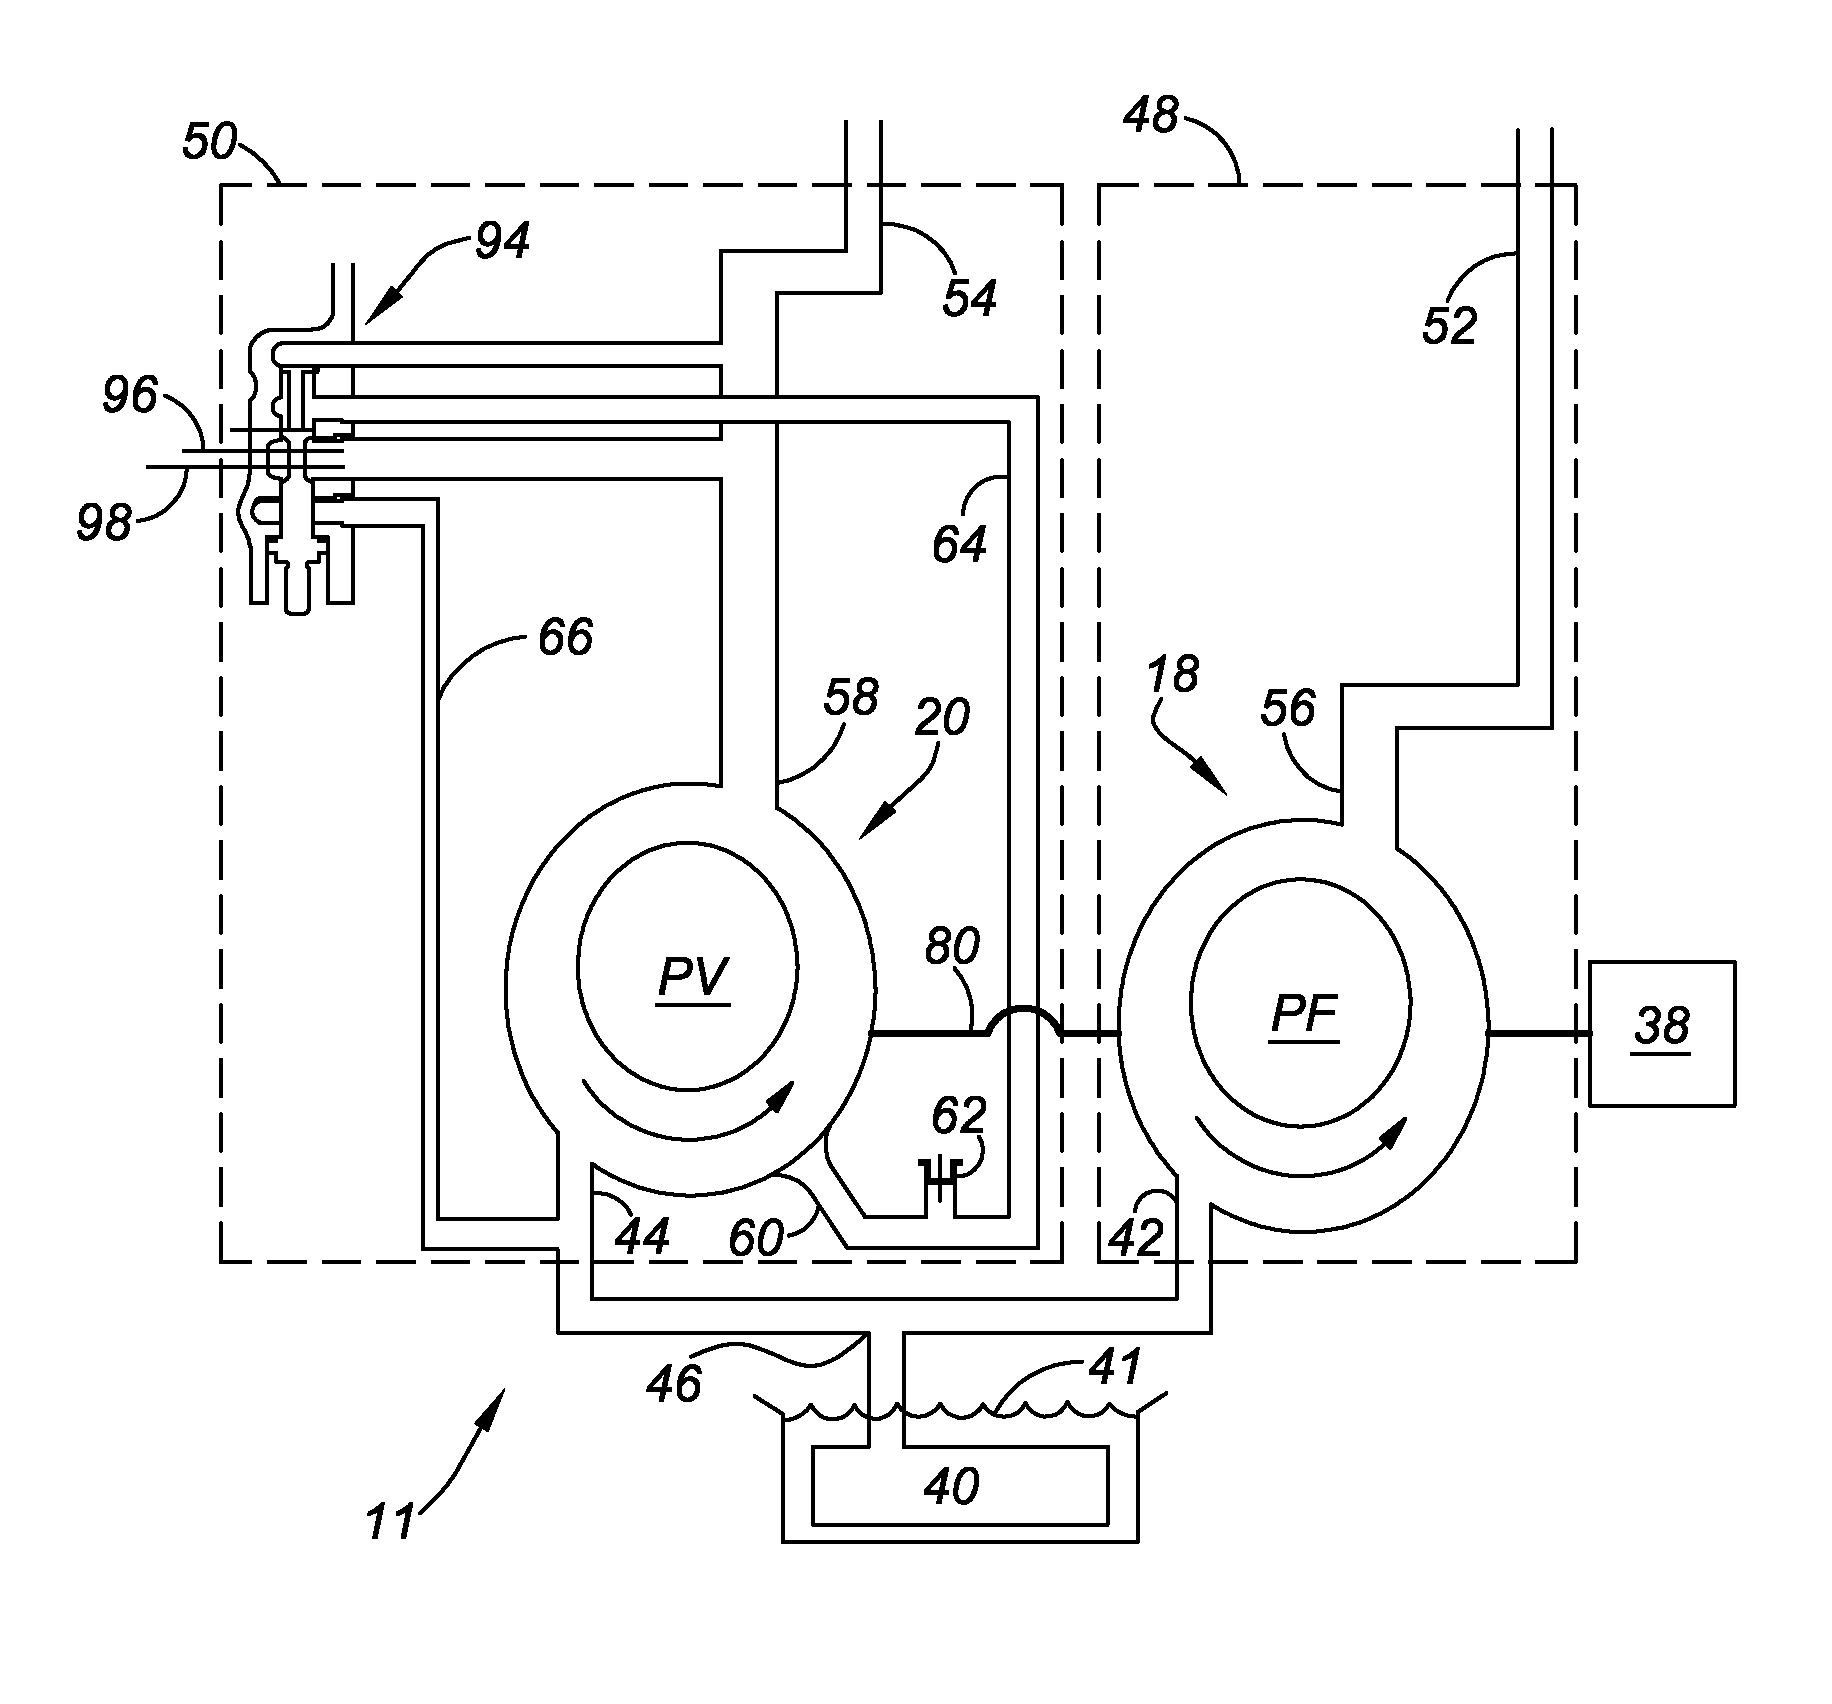 Split-pressure dual pump hydraulic fluid supply system for a multi-speed transmission and method